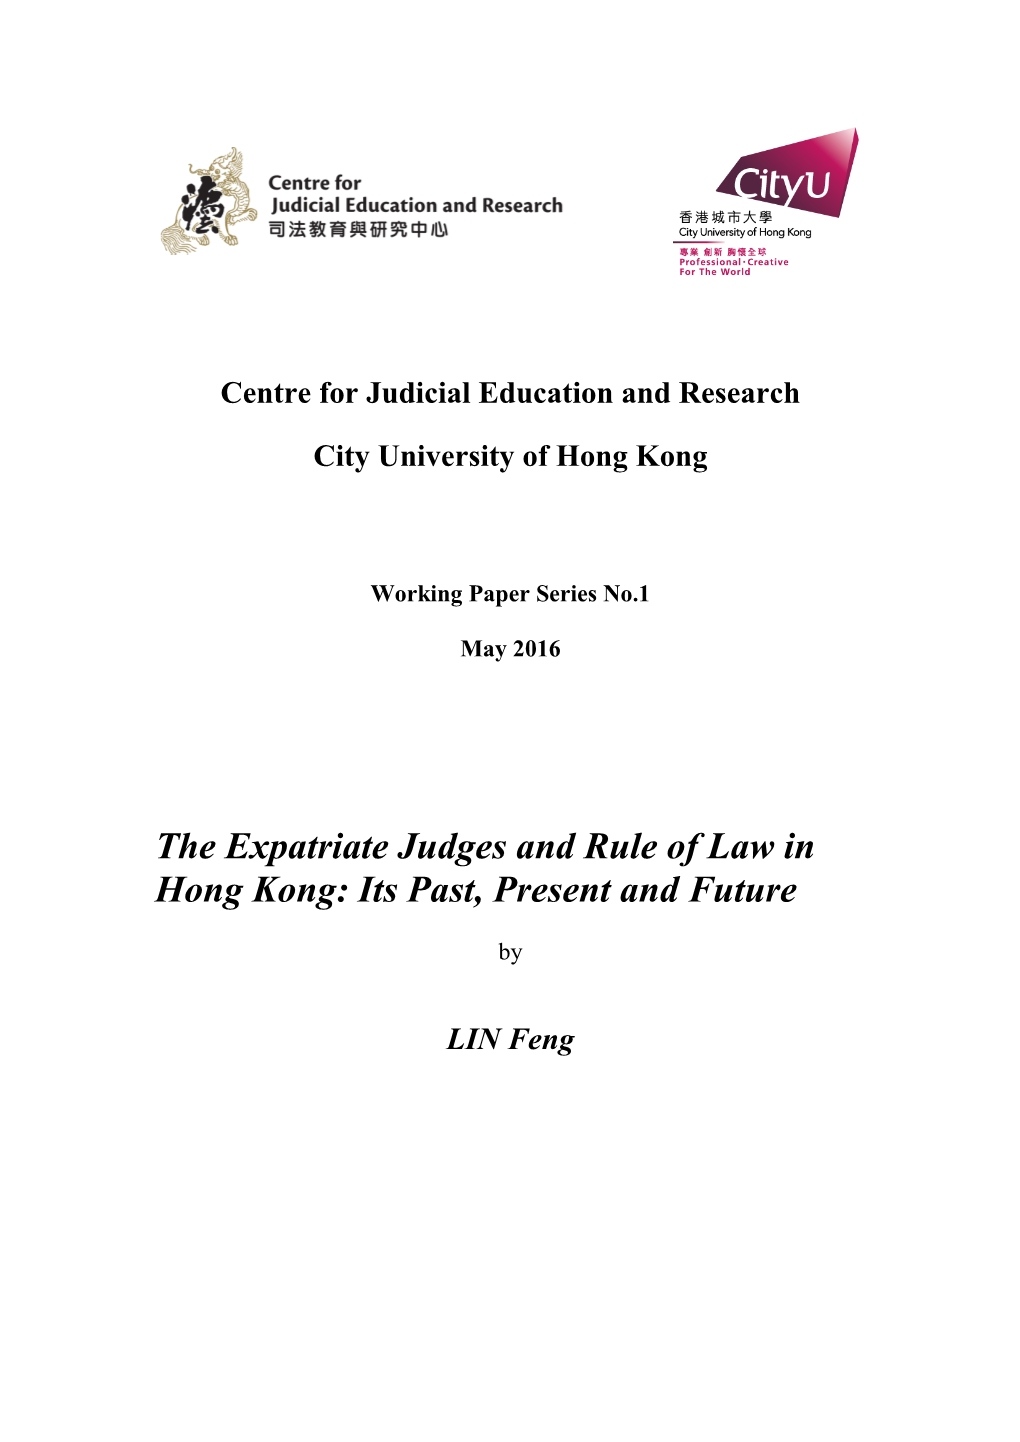 The Expatriate Judges and Rule of Law in Hong Kong: Its Past, Present and Future